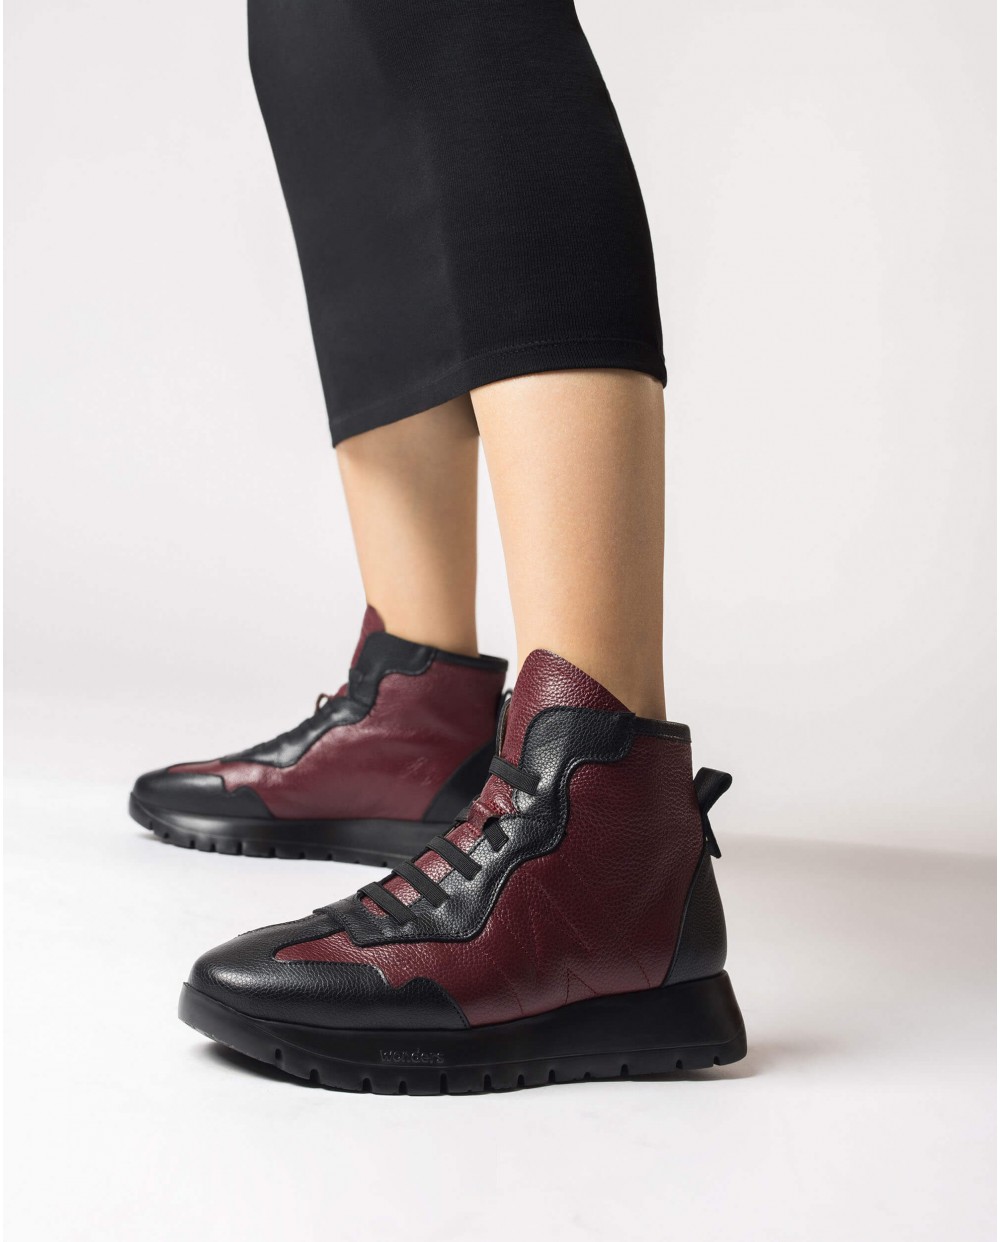 Wonders-Ankle Boots-England bordeaux ankle boot